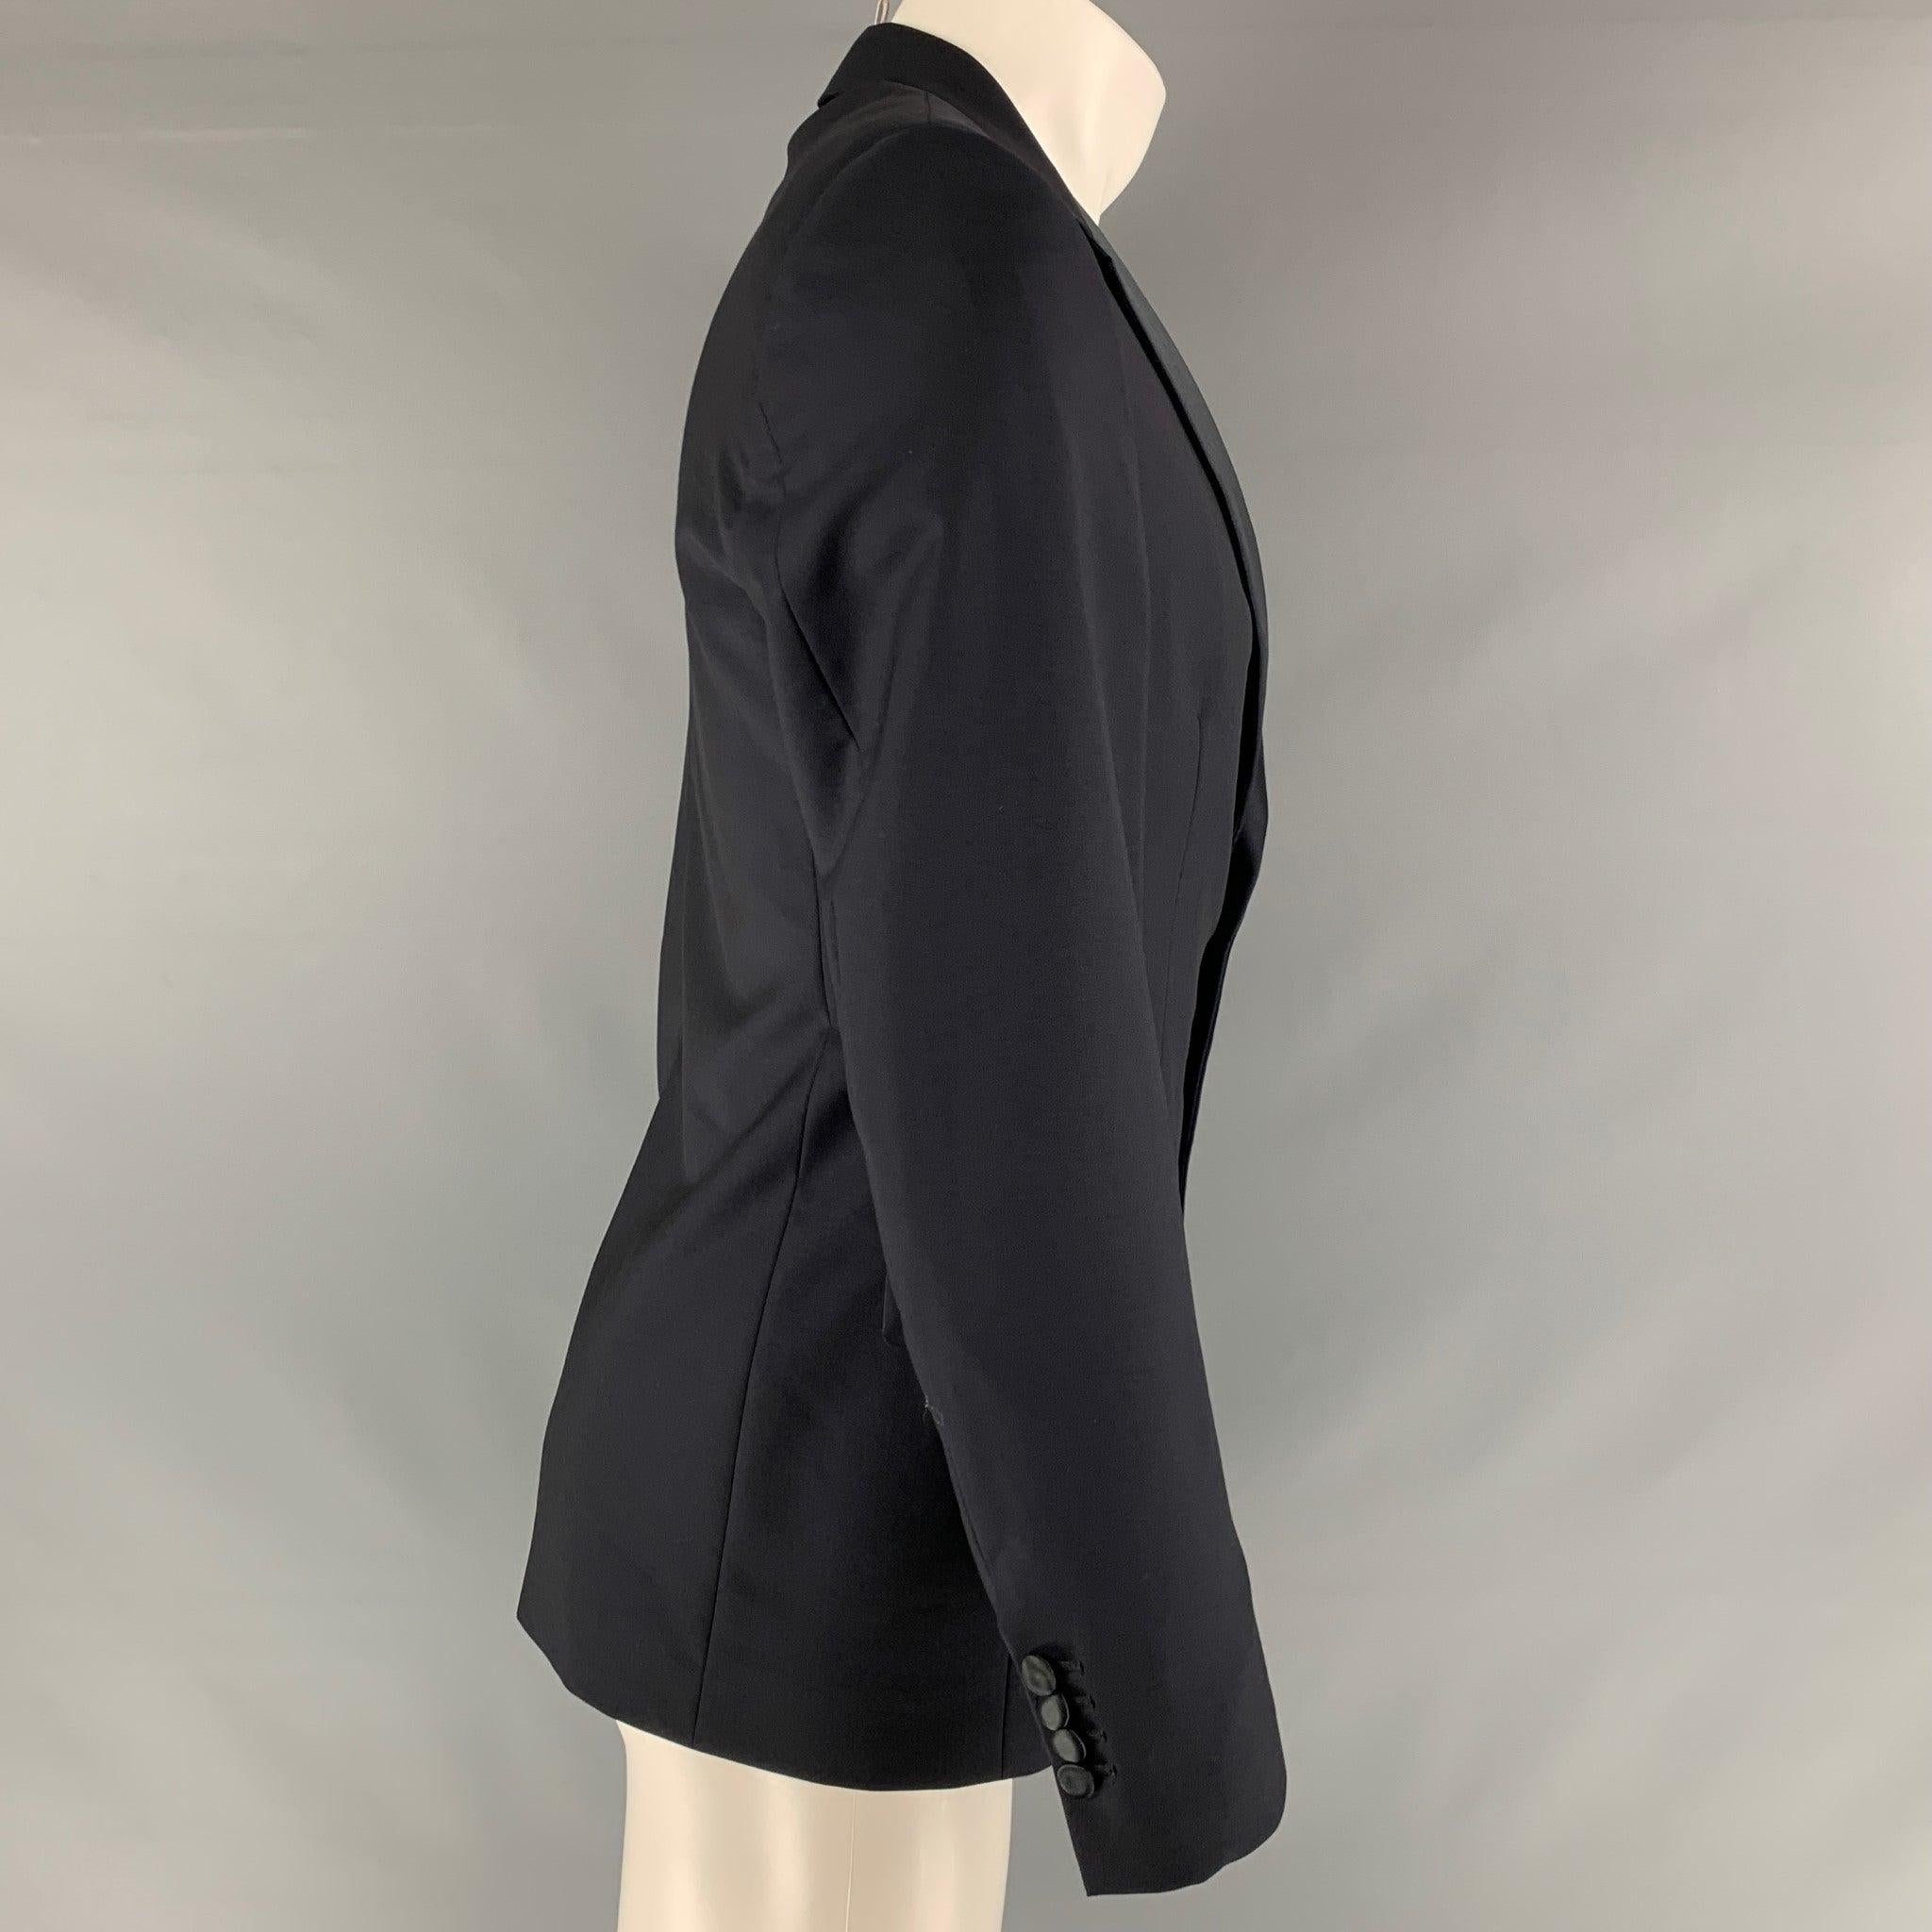 PRADA sport coat comes in a navy wool and mohair woven material featuring a notch lapel, shoulder pockets, flap pockets, and a two button closure. Made in Italy.Excellent Pre-Owned Condition. 

Marked:   48 

Measurements: 
 
Shoulder: 17 inches 